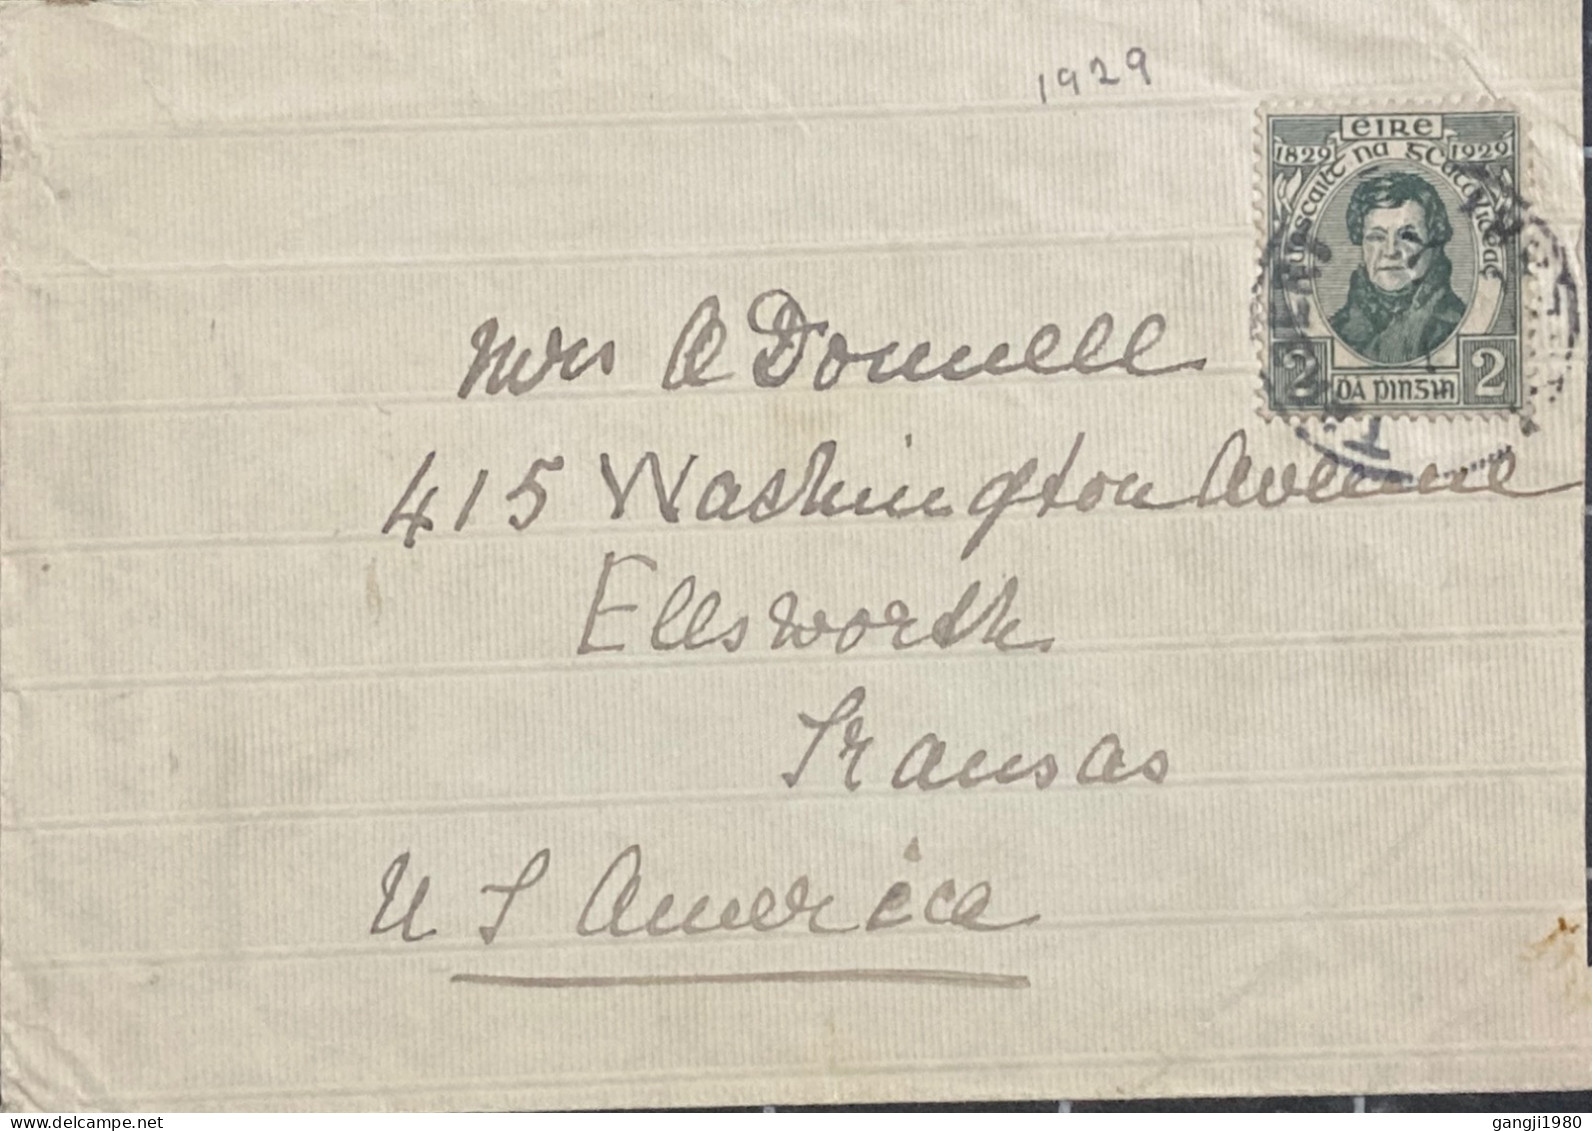 IRELAND 1929, COVER USED TO USA,  DANIEL O CONNELL STAMP, TARBERT TOWN CANCEL. - Cartas